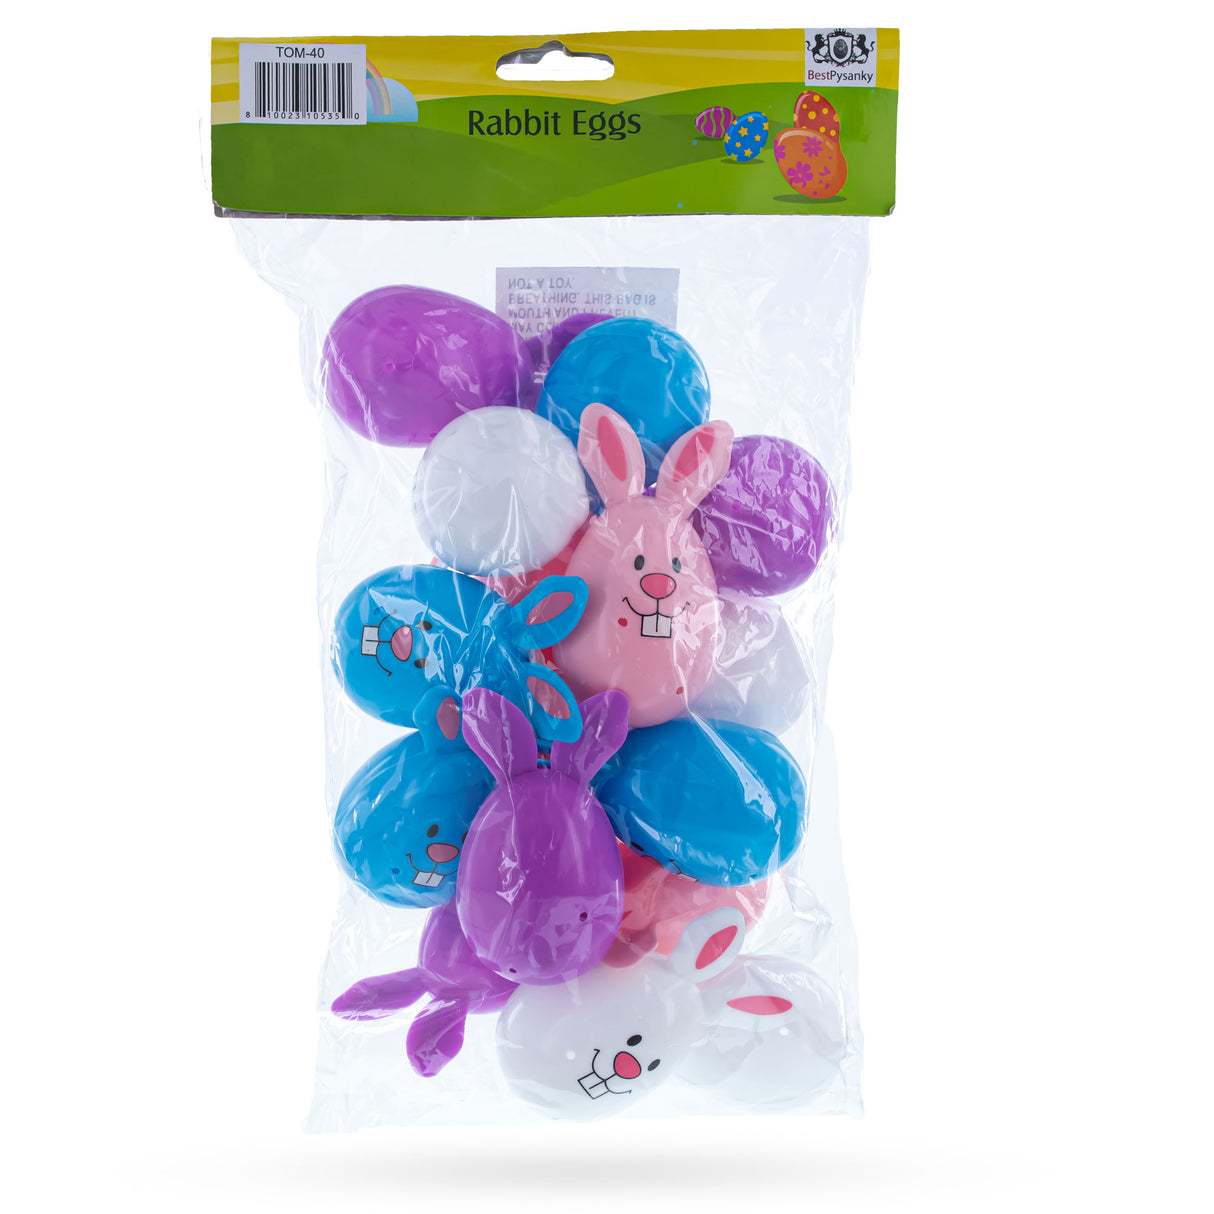 Shop Sweet Bunny Surprise: Set of 16 Fillable Rabbit-Shaped Plastic Easter Eggs, 3.25 Inches. Buy Easter Eggs Plastic Solid Color Multi Oval Plastic for Sale by Online Gift Shop BestPysanky fillable plastic eggs, plastic eggs,  plastic eggs fillable, easter eggs bulk, plastic eggs for toys, Easter decor, plastic eggs easter, egg hunt, Easter decorations, decorative